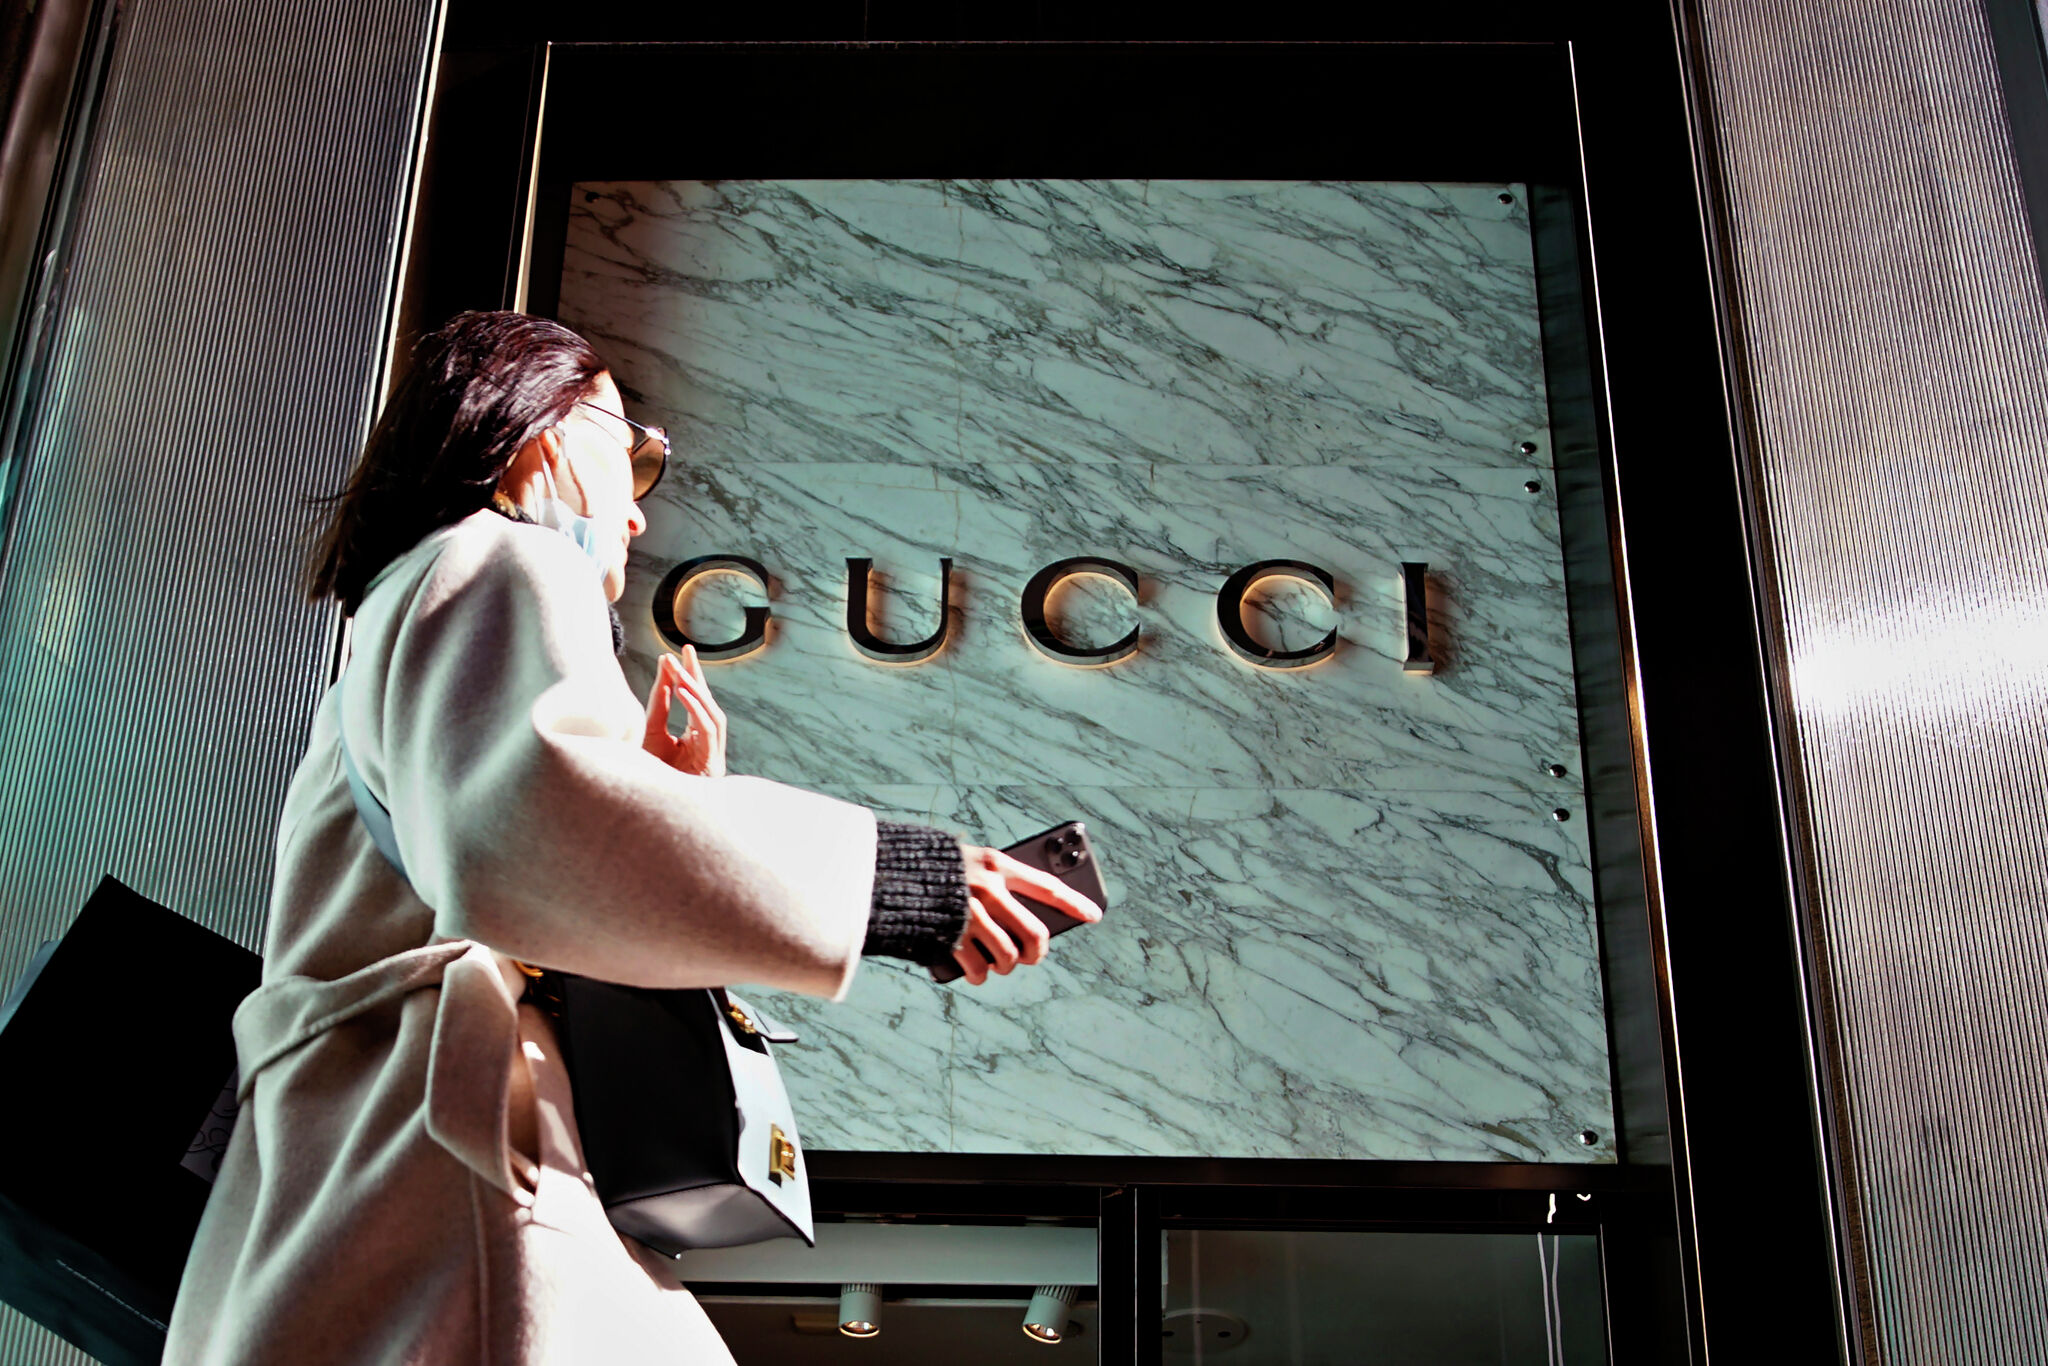 San Antonio is getting its first standalone Gucci store amid a 'luxury  sales boom